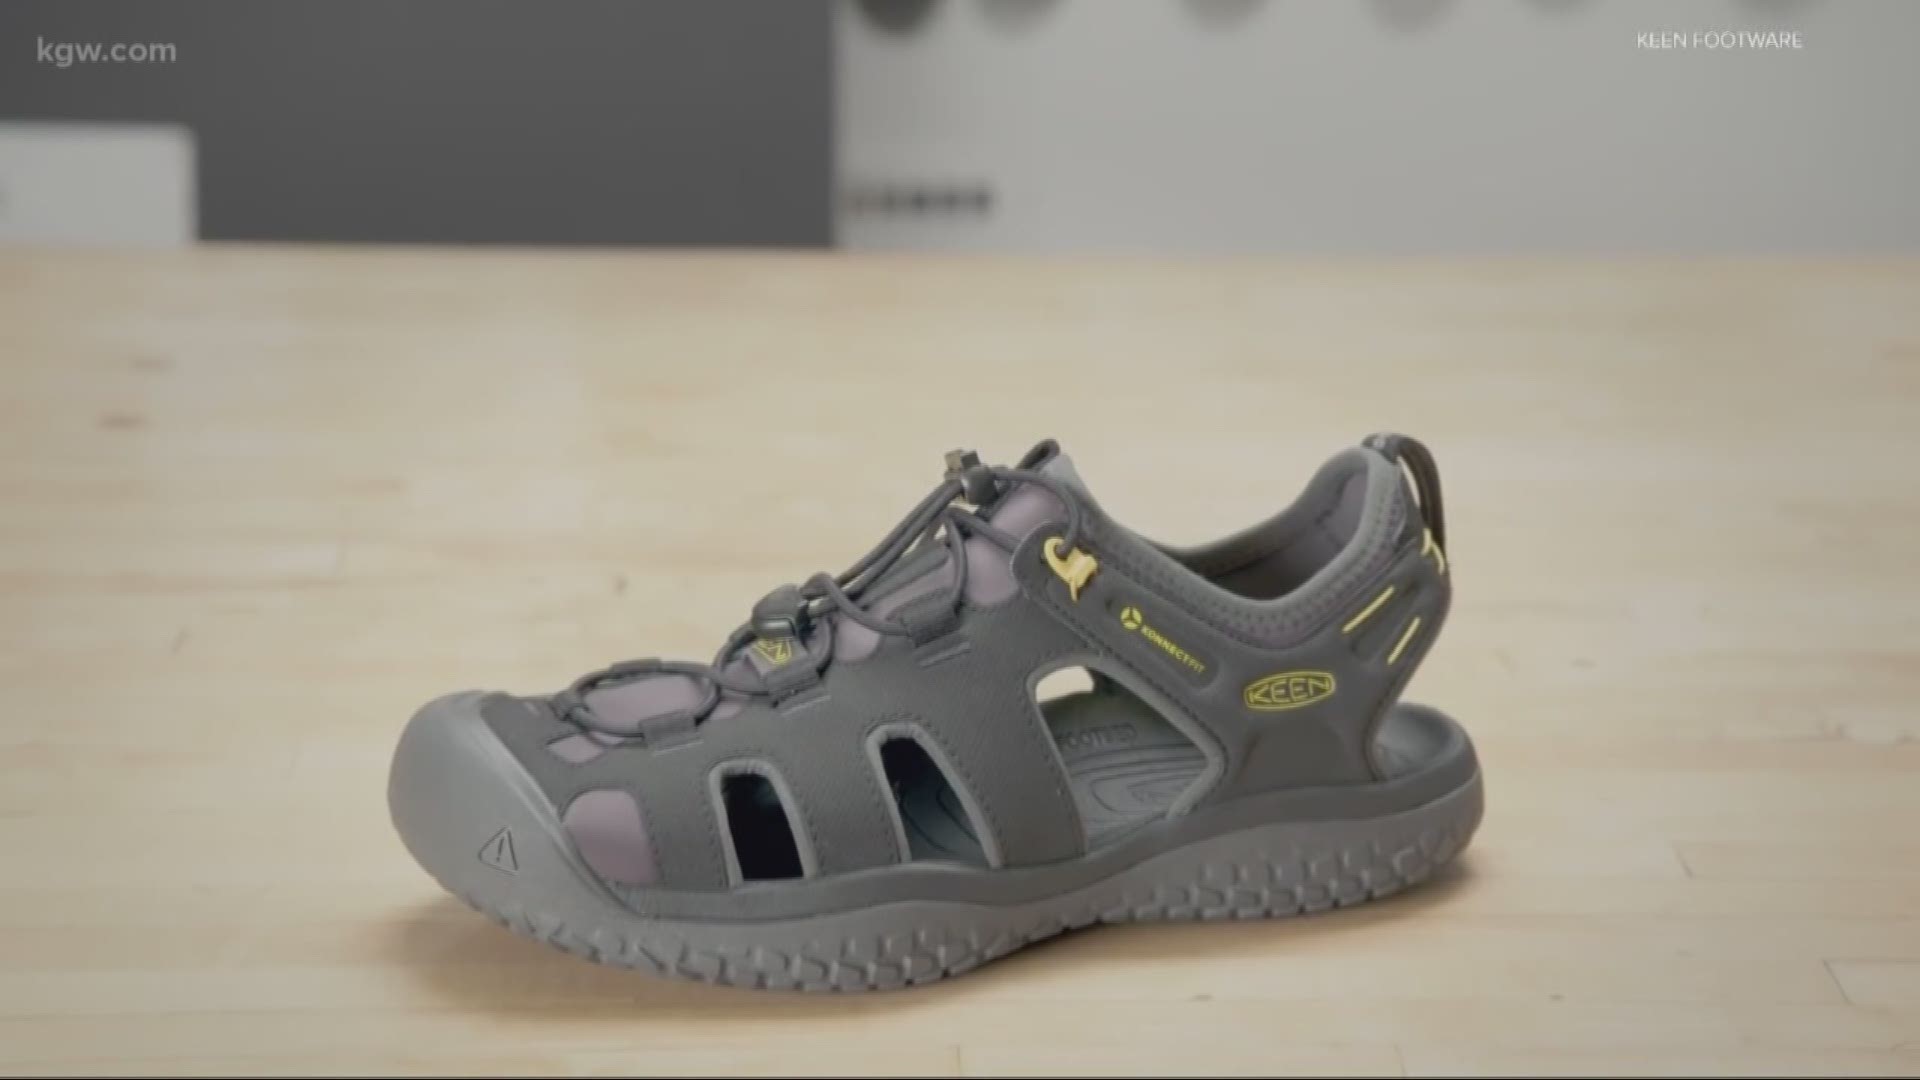 Portland’s Keen Footwear has donated 100,000 shoes during the coronavirus pandemic.